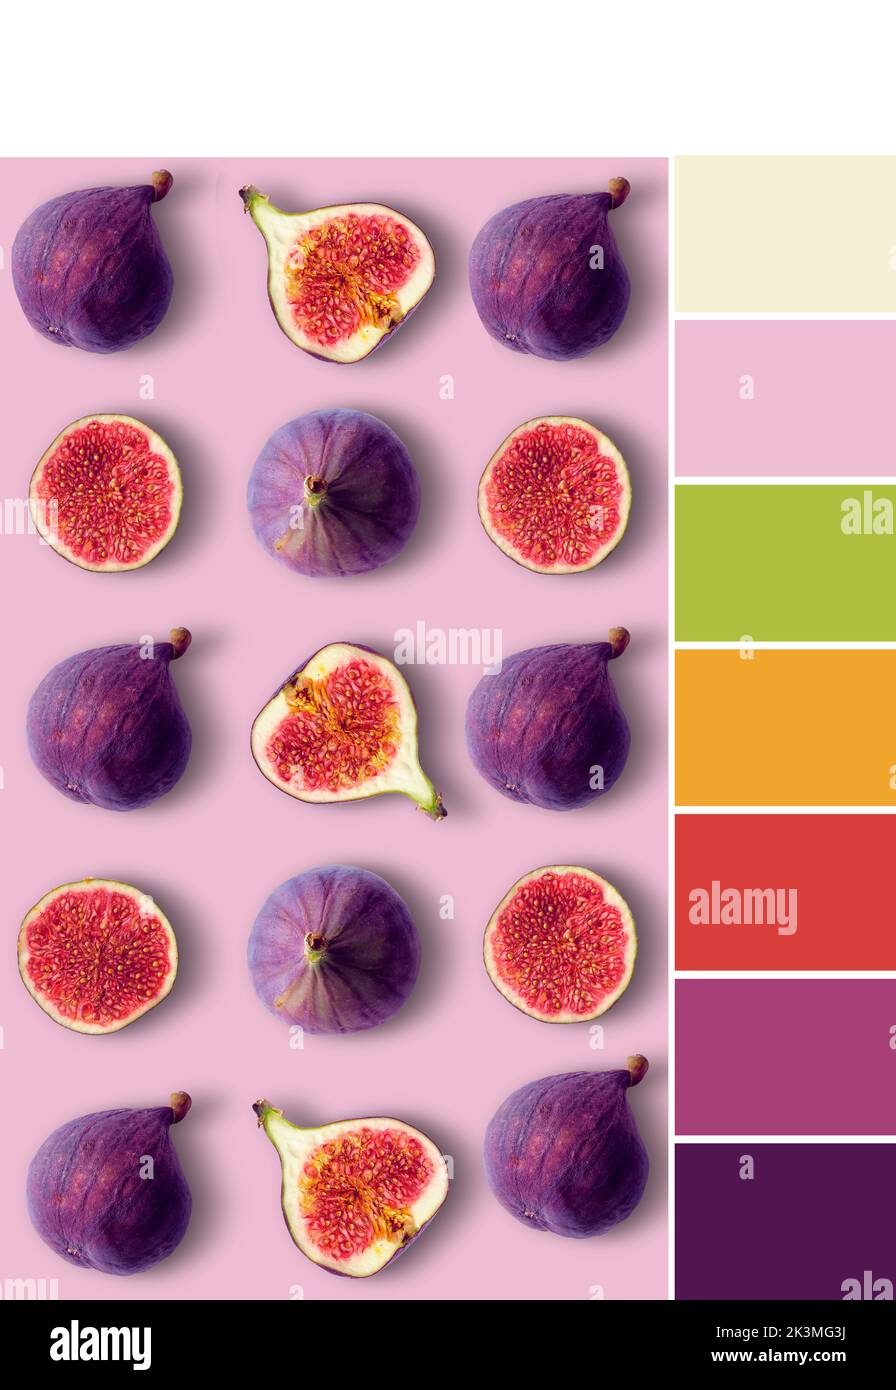 Color matching palette from image of fig fruit, whole and cut in half on pink color background. Stock Photo